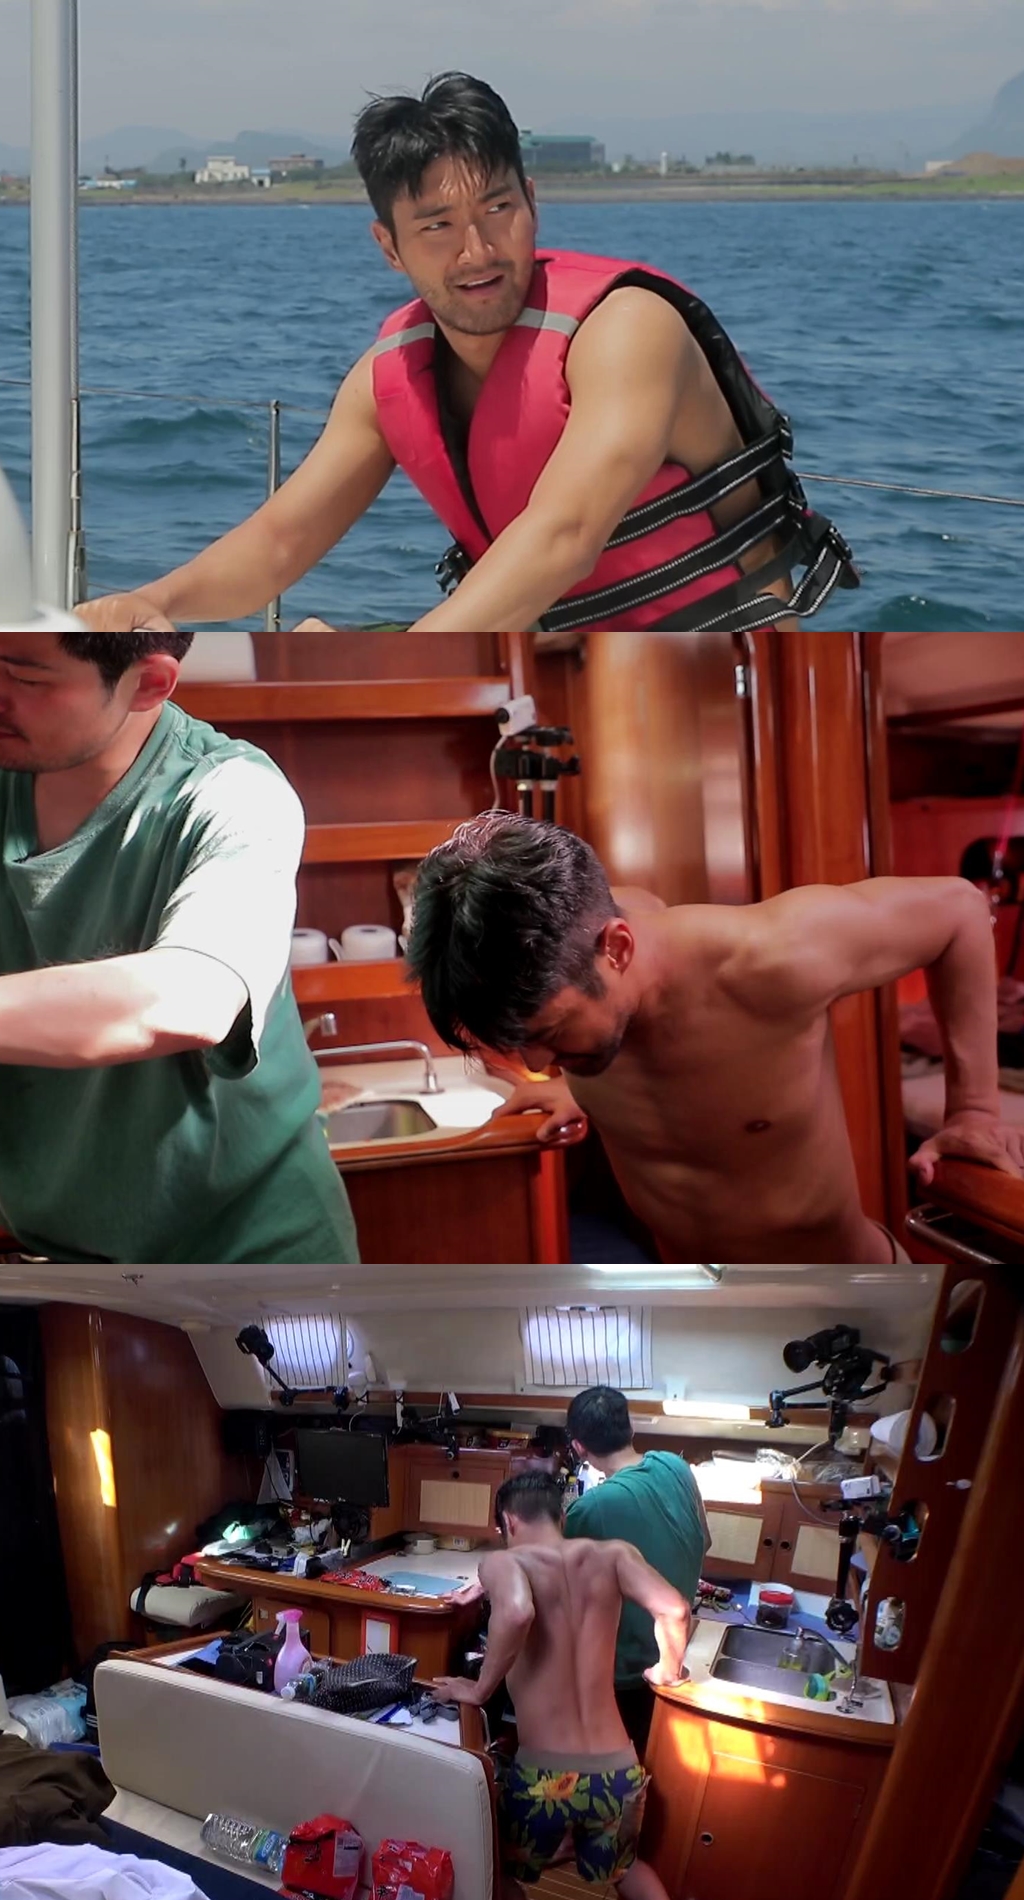 The dance instincts and Exercise passion of Choi Siwon syacht expedition explodes.In the 8th MBC Everlon yacht Expedition broadcast on October 5, Jingu - Choi Siwon - Chang Kiha - Song Ho-joon returns to Jeju Island after facing the rough sea of ​​the Pacific Ocean is drawn.After the storm, the members who have found peace and relaxation will give laughter and healing to viewers by looking for the fun of the new yacht.In the meantime, Choi Siwons 8th scene, which made the yacht shake, is revealed and focuses attention.Choi Siwon suddenly danced with the dance singer instinct, and he showed an energizer like burning the passion of Exercise by actively utilizing the narrow yacht space.Choi Siwon, who wanted to share his musical taste with his favorite brother Chang Kiha on this day, responded to the exciting music and moved his body.Choi Siwon, who started to ride the rhythm, shrugged his shoulders and finally stepped on the twist step and poured out excitement.Its not the end here: The excited Choi Siwon suddenly burned her Exercise passions properly.The picture of Choi Siwon in the Exercise Sammaegyeong behind Chang Kiha cooking was captured.Choi Siwons yacht interlude Exercise time, which seems to be watching a tight muscle show, attracts attention.Choi Siwon, who had suffered the most severe seasickness among the Yacht Expedition members, made viewers feel sorry for him because he was struggling to keep his body in shape.But serious seasickness has also become a memory of the past.Choi Siwon, who is equipped with room on the way back to Jeju Island, is the back door of the yacht expedition with his passion for not leaving his body for a while.Meanwhile, MBC Everlons yacht Expedition, where Choi Siwons dance and Exercise passion will explode, will be broadcast on October 5 at 8:30 pm.iMBC  Photos Offering MBC Everlon